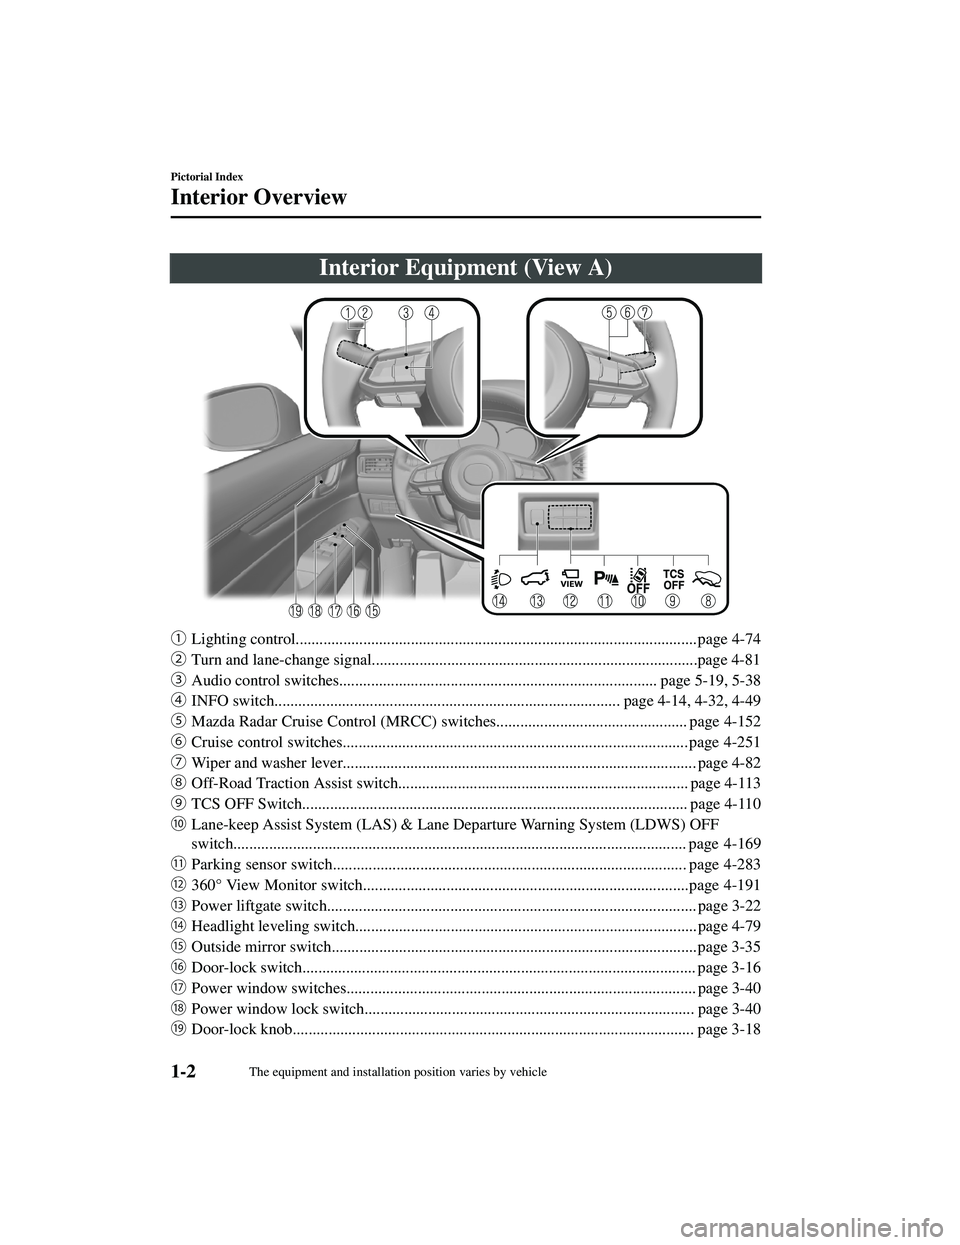 MAZDA MODEL CX-5 2021  Owners Manual Interior Equipment (View A)
ƒLighting control.....................................................................................................page 4-74
„ Turn and lane-change signal..........